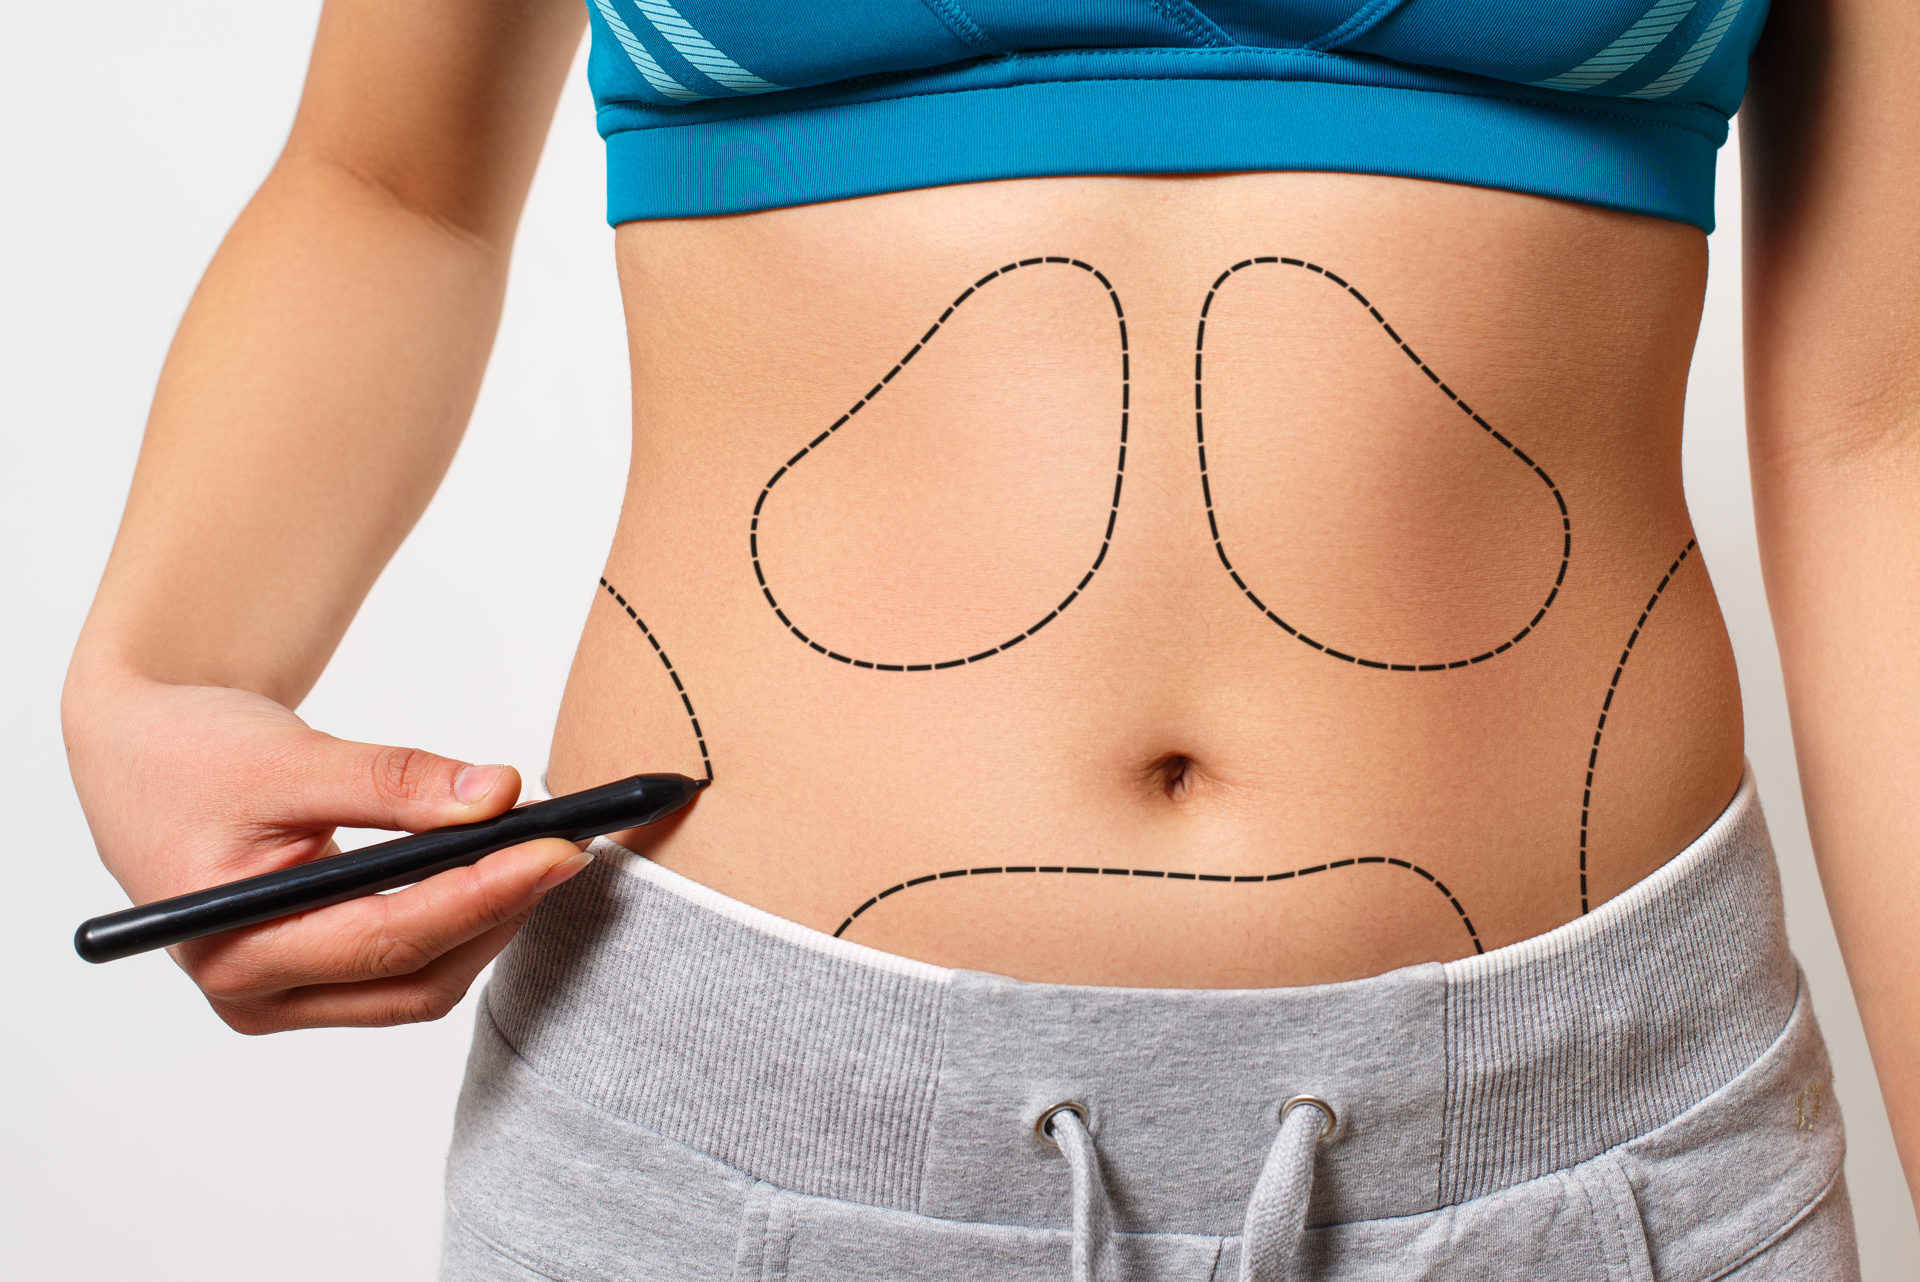 a woman shows a dotted line on her body liposuction zone. on white background